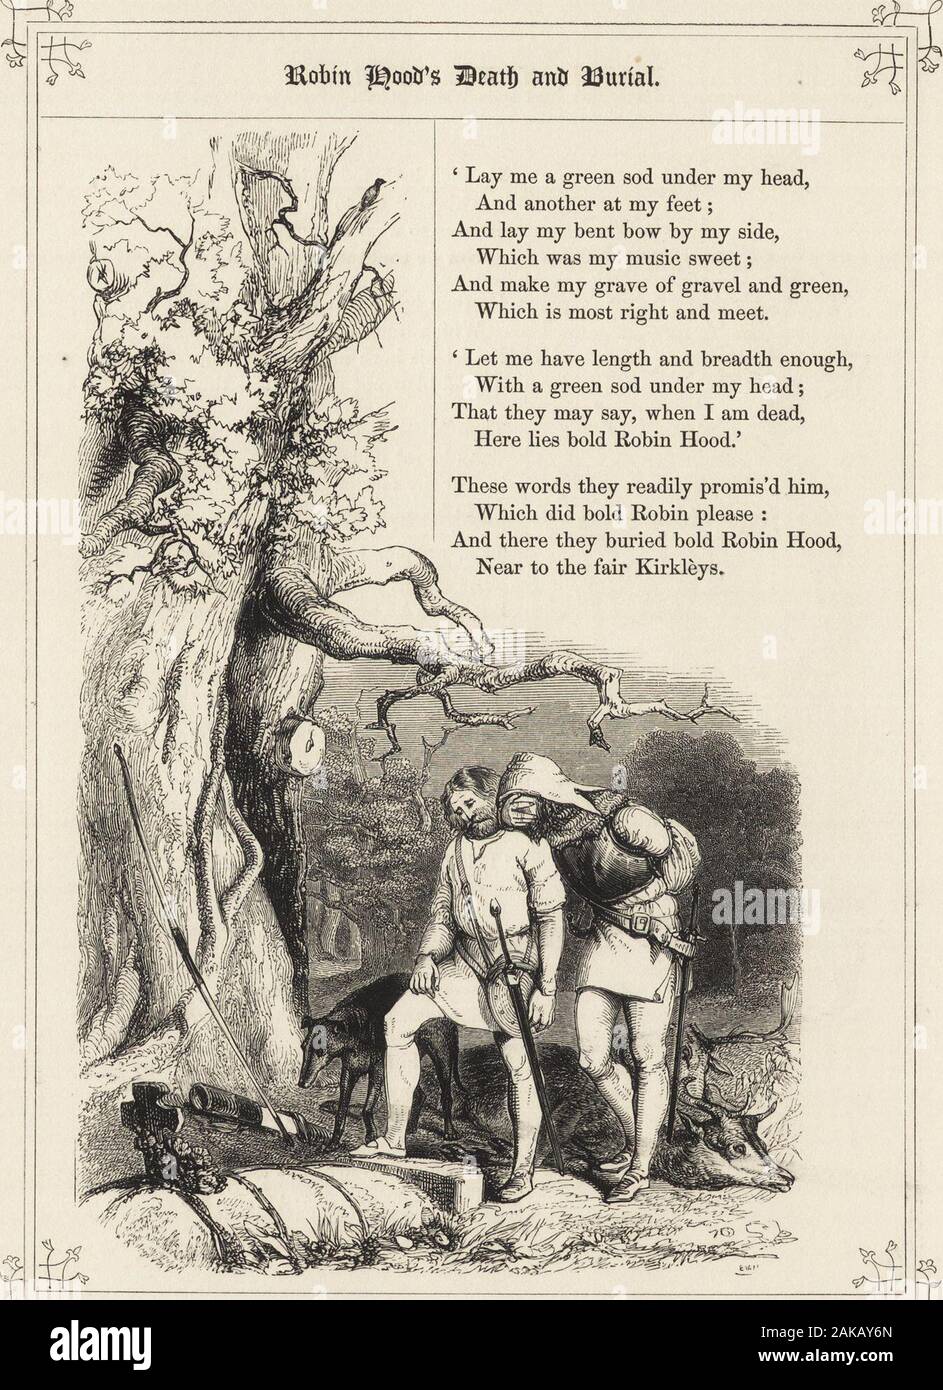 The book of British ballads . s knee ; A boon, a boon, cries Little John, Master, I beg of thee. What is that boon, quoth Robin Hood, Little John, thou begs of me ? It is to burn fair Kirkley-hall,And all their nunnery. Now nay, now nay, quoth Robin Hood, That boon Ill not grant thee ; I never hurt woman in all my life,Nor man in womans company. I never hurt fair maid in all my time, Nor at my end shall it be ;But give me my bent bow in my hand, And a broad arrow Ill let flee ;And where this arrow is taken up, There shall my grave diggd be. 337 Bobm ^oofcfs Btatfc antr burial. Lay me a green s Stock Photo